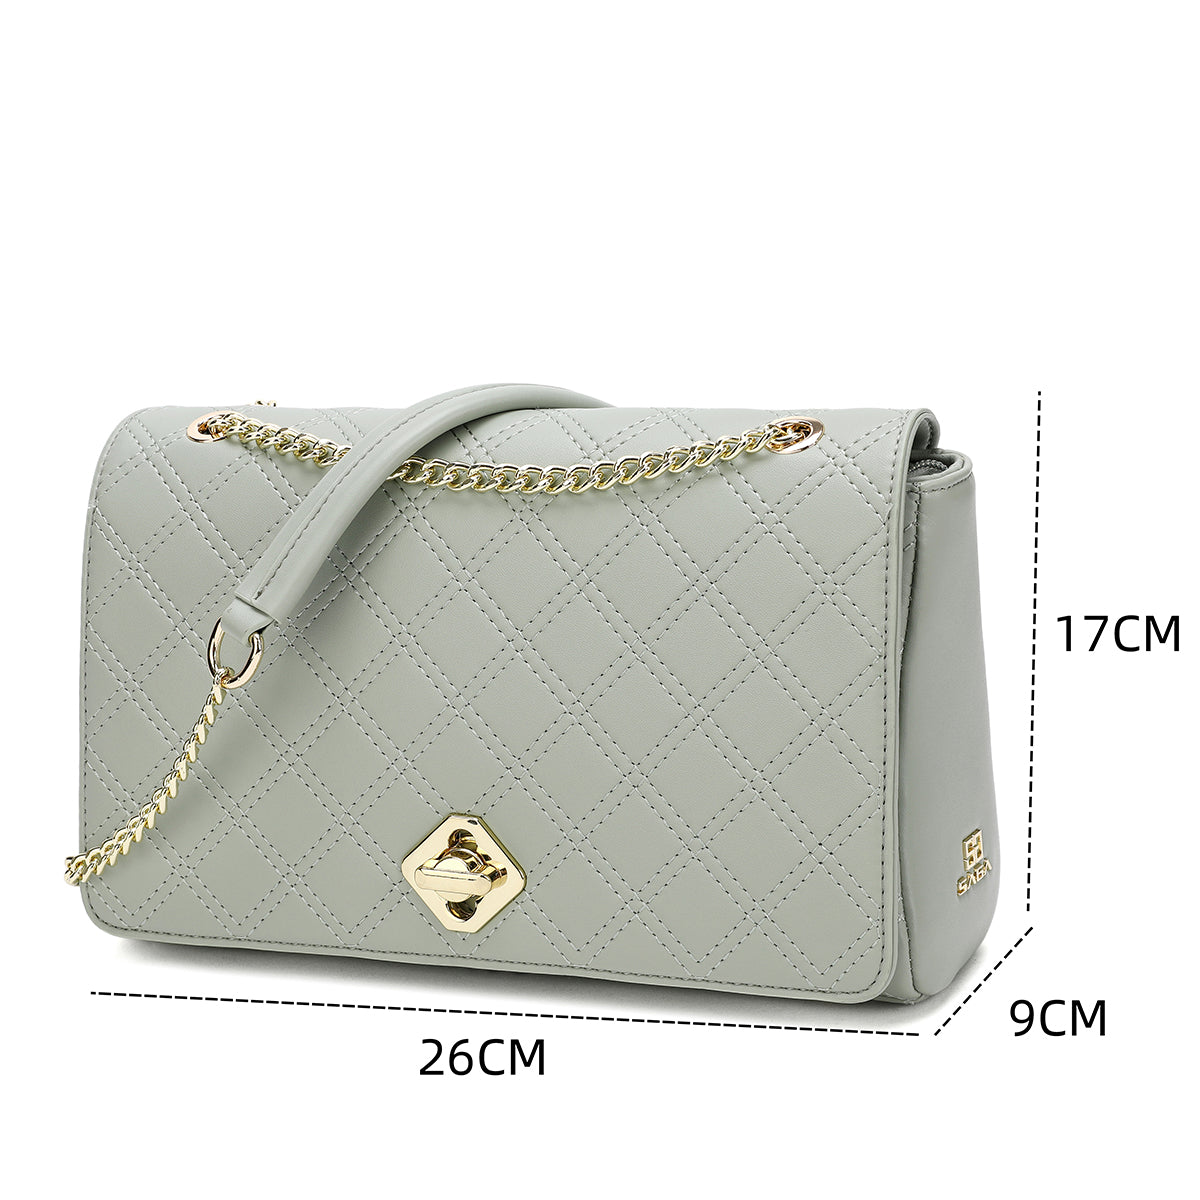 Handbag with an elegant golden chain shoulder strap, available in three elegant colors